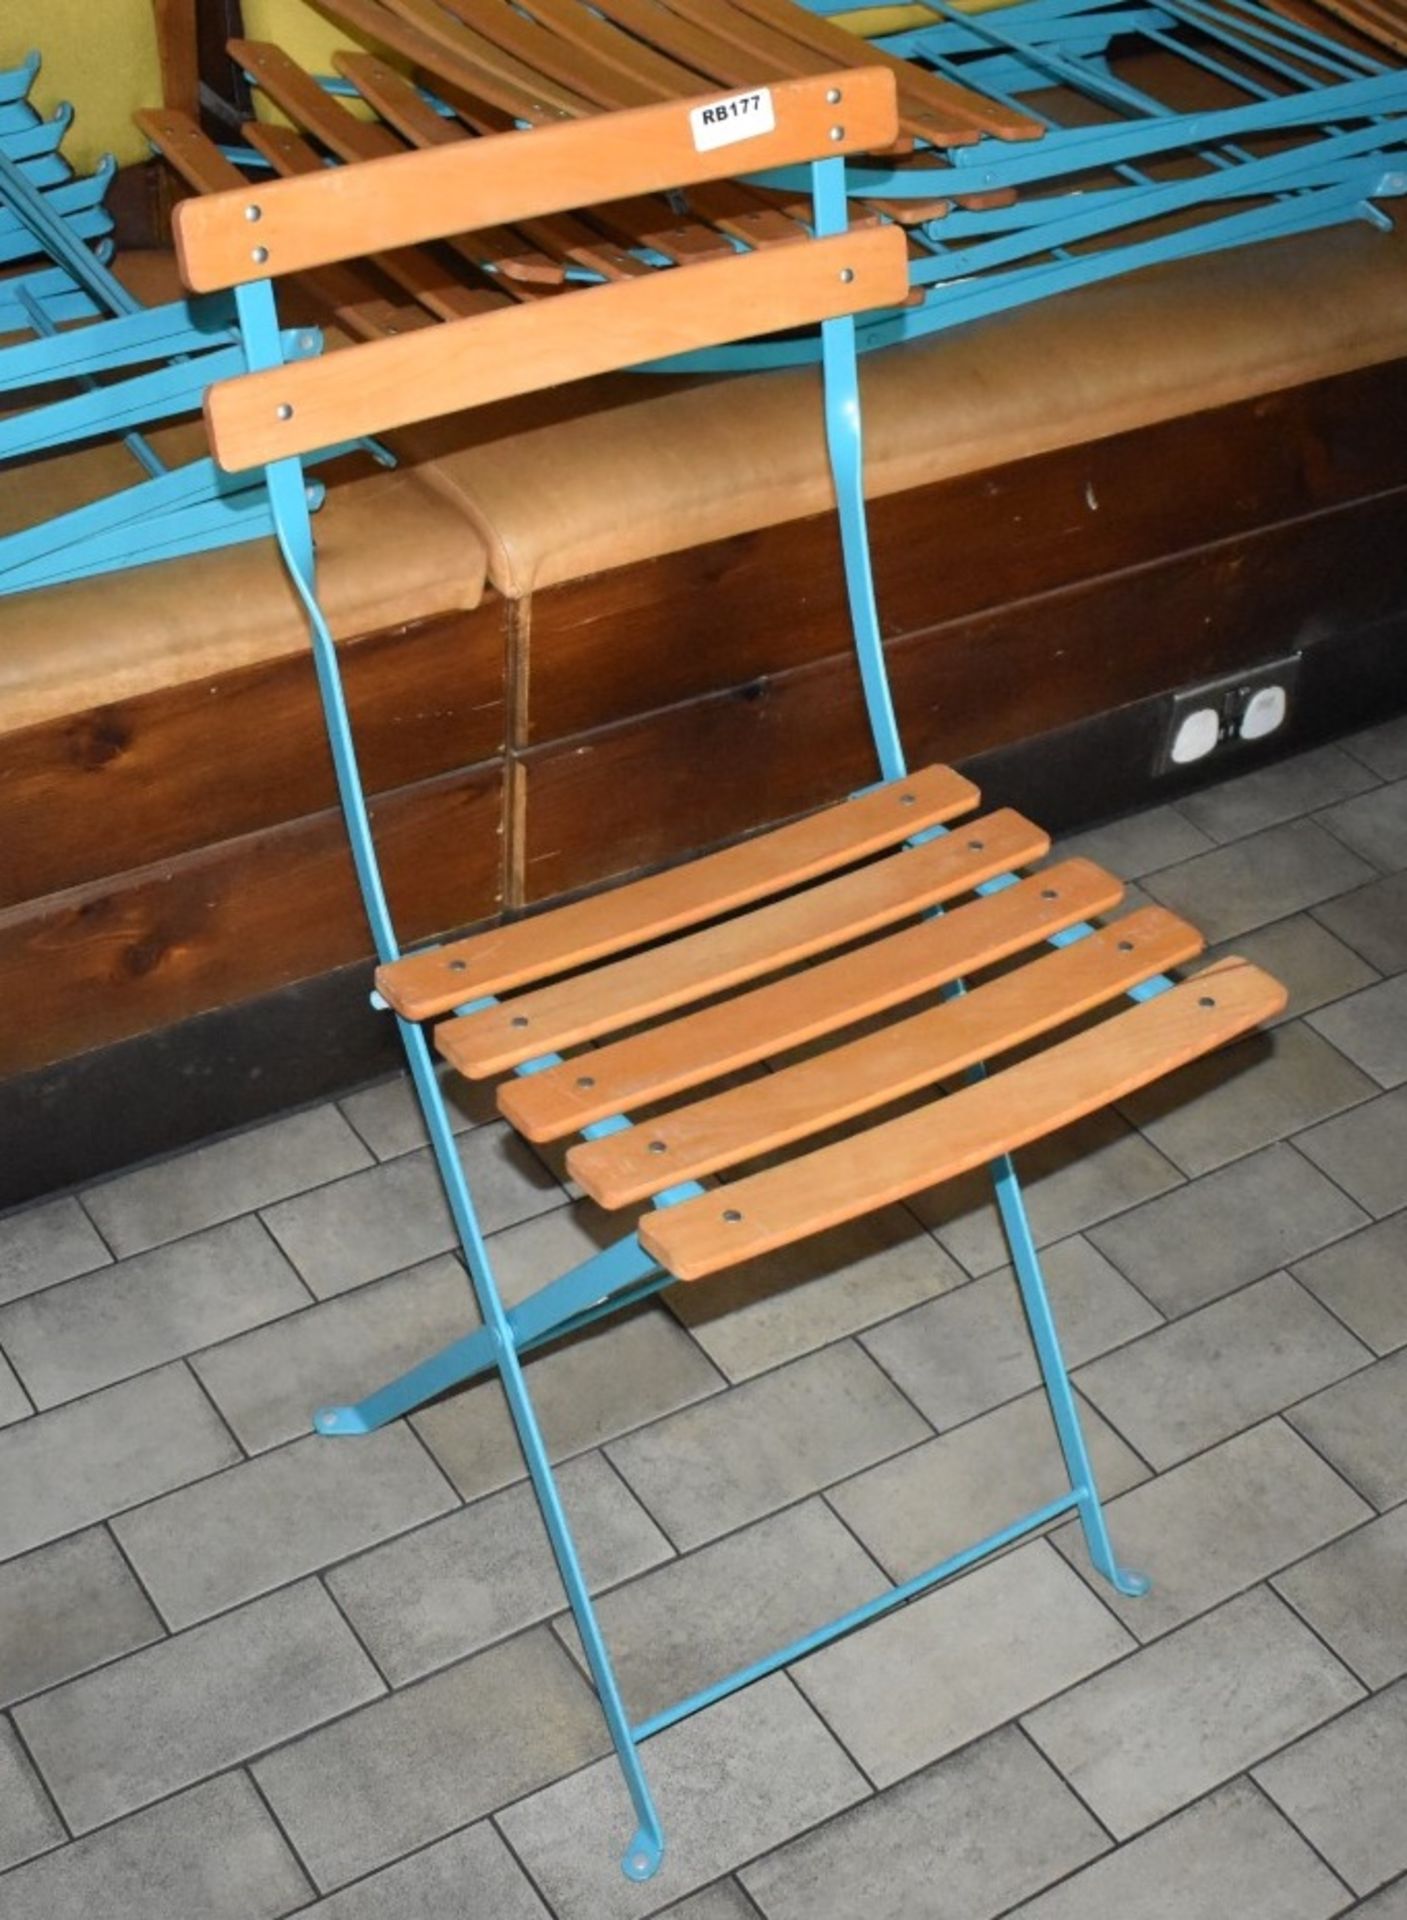 6 x Outdoor Folding Chairs in Blue With Wood Seats and Backrests - Unused - Ref: RB177 - CL558 - - Image 2 of 5